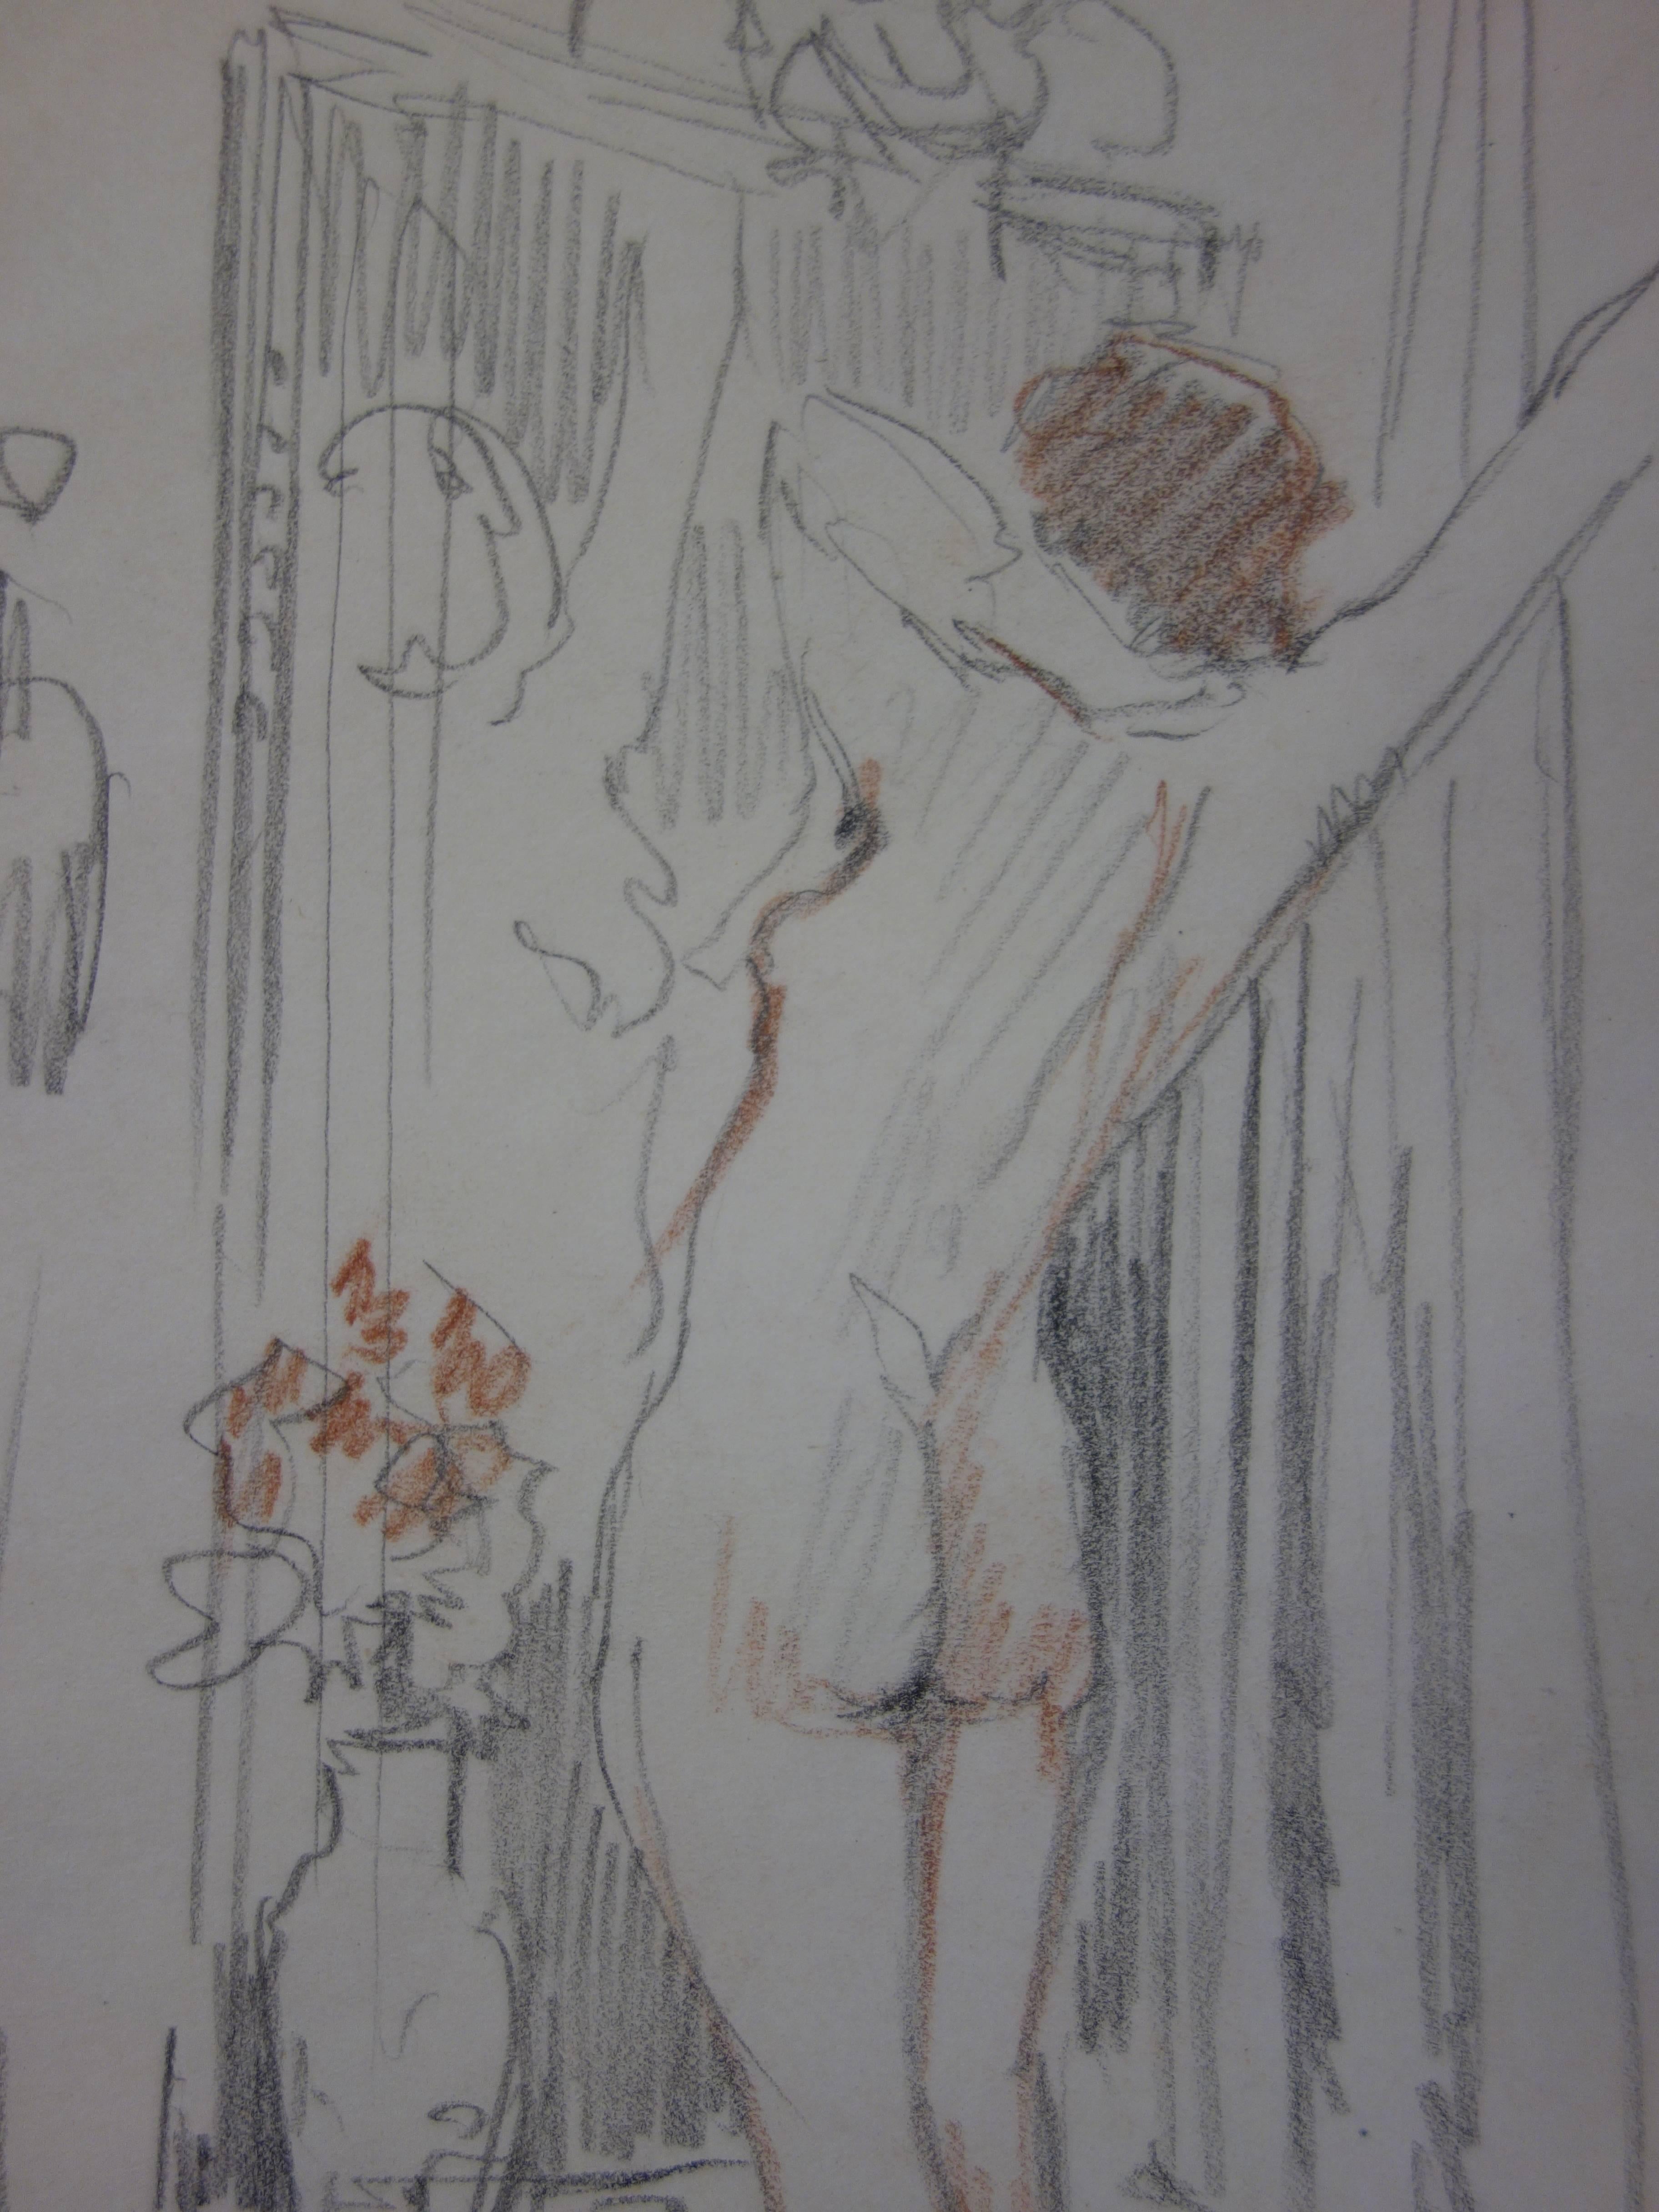 Georges CONRAD (1874-1936)
Morning toilet

Original pencil and color pencils drawing
Signed with the stamp of atelier
On paper 26.5 x 20 cm (c. 10,4 x 7.8 in)

Good condition, paper lightly yellowed

Information: Georges Conrad was a French painter